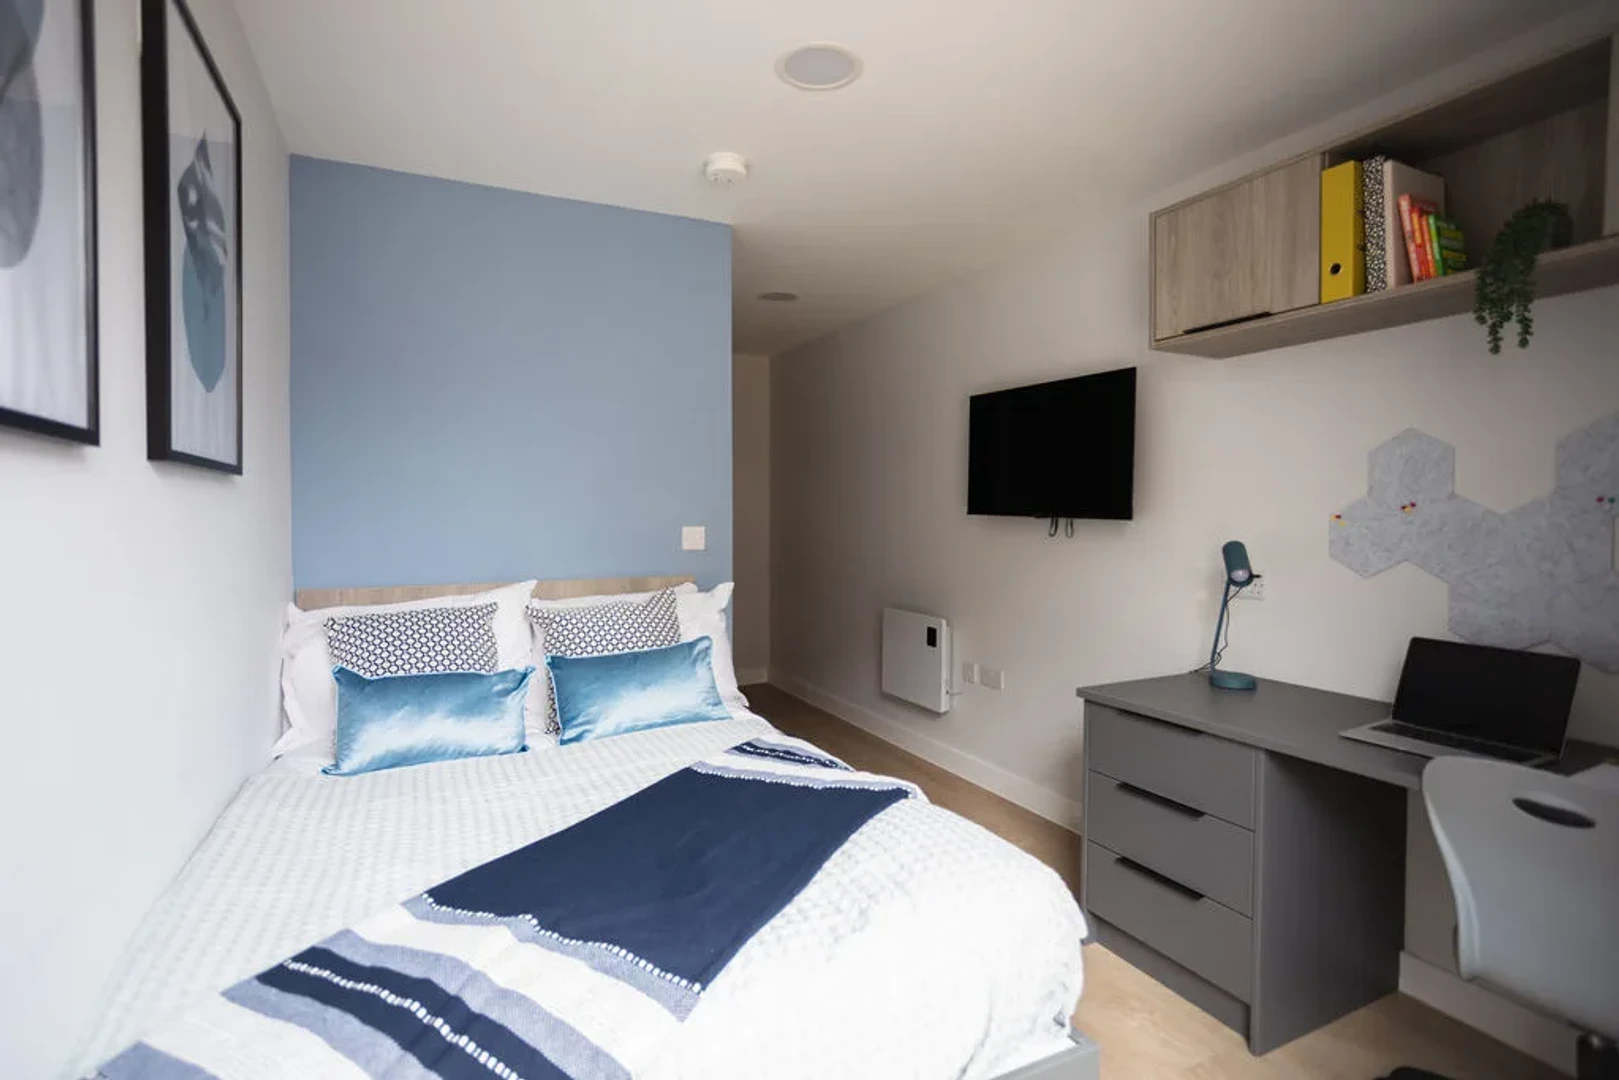 Renting rooms by the month in exeter